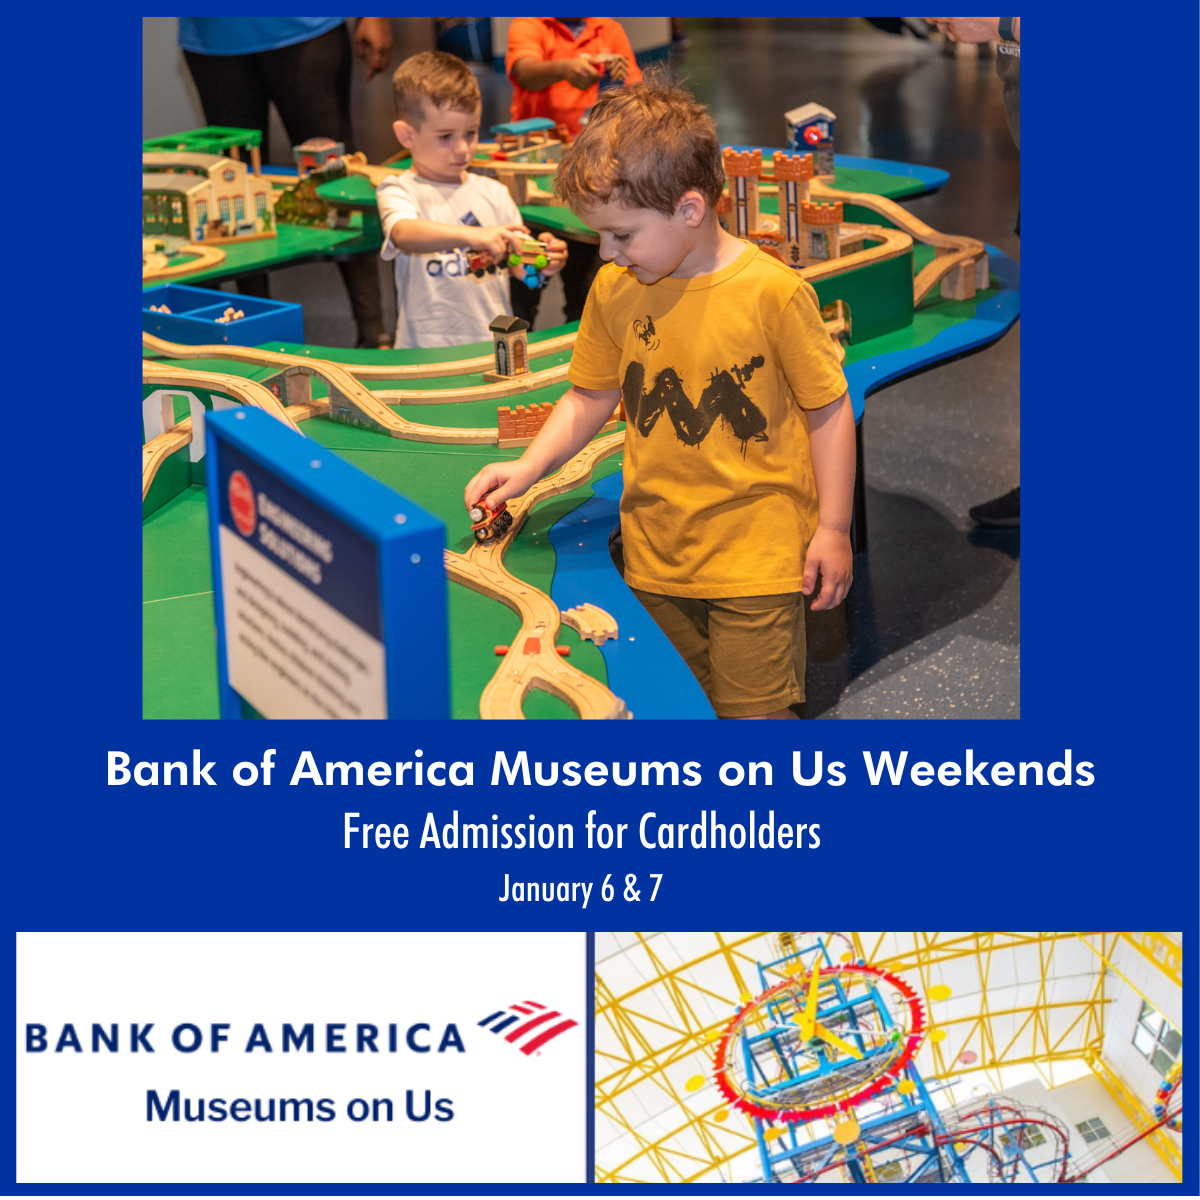 Bank of America Museums on Us Free Weekend at Museum of Discovery and